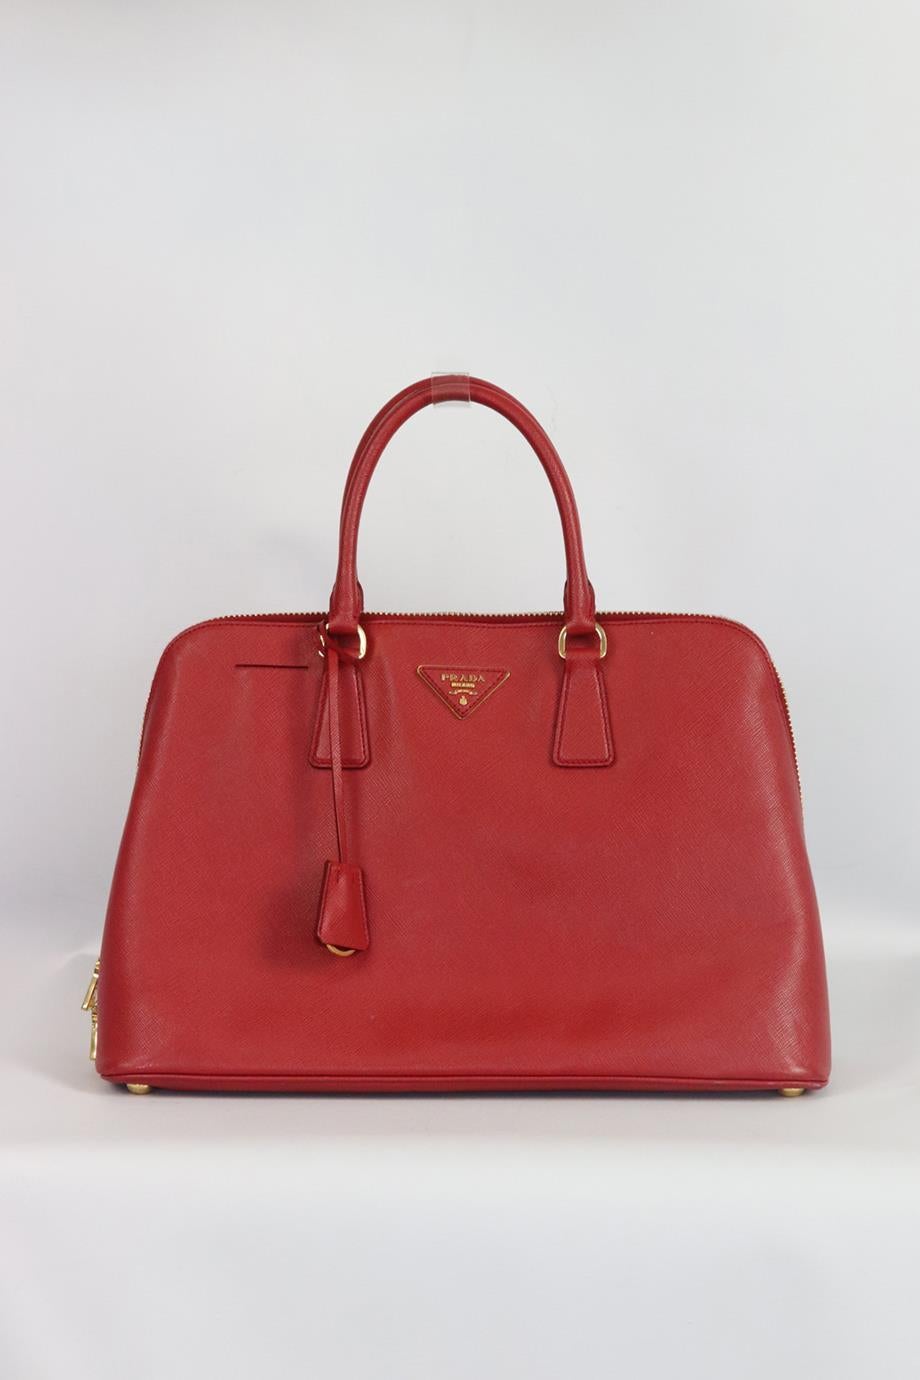 Prada Promenade Saffiano large textured leather tote bag. Made from durable red textured leather with three internal compartment and gold hardware. Black. Zip fastening at top. Does not come with dustbag or box. Height: 10.25in. Width: 14.75 in.